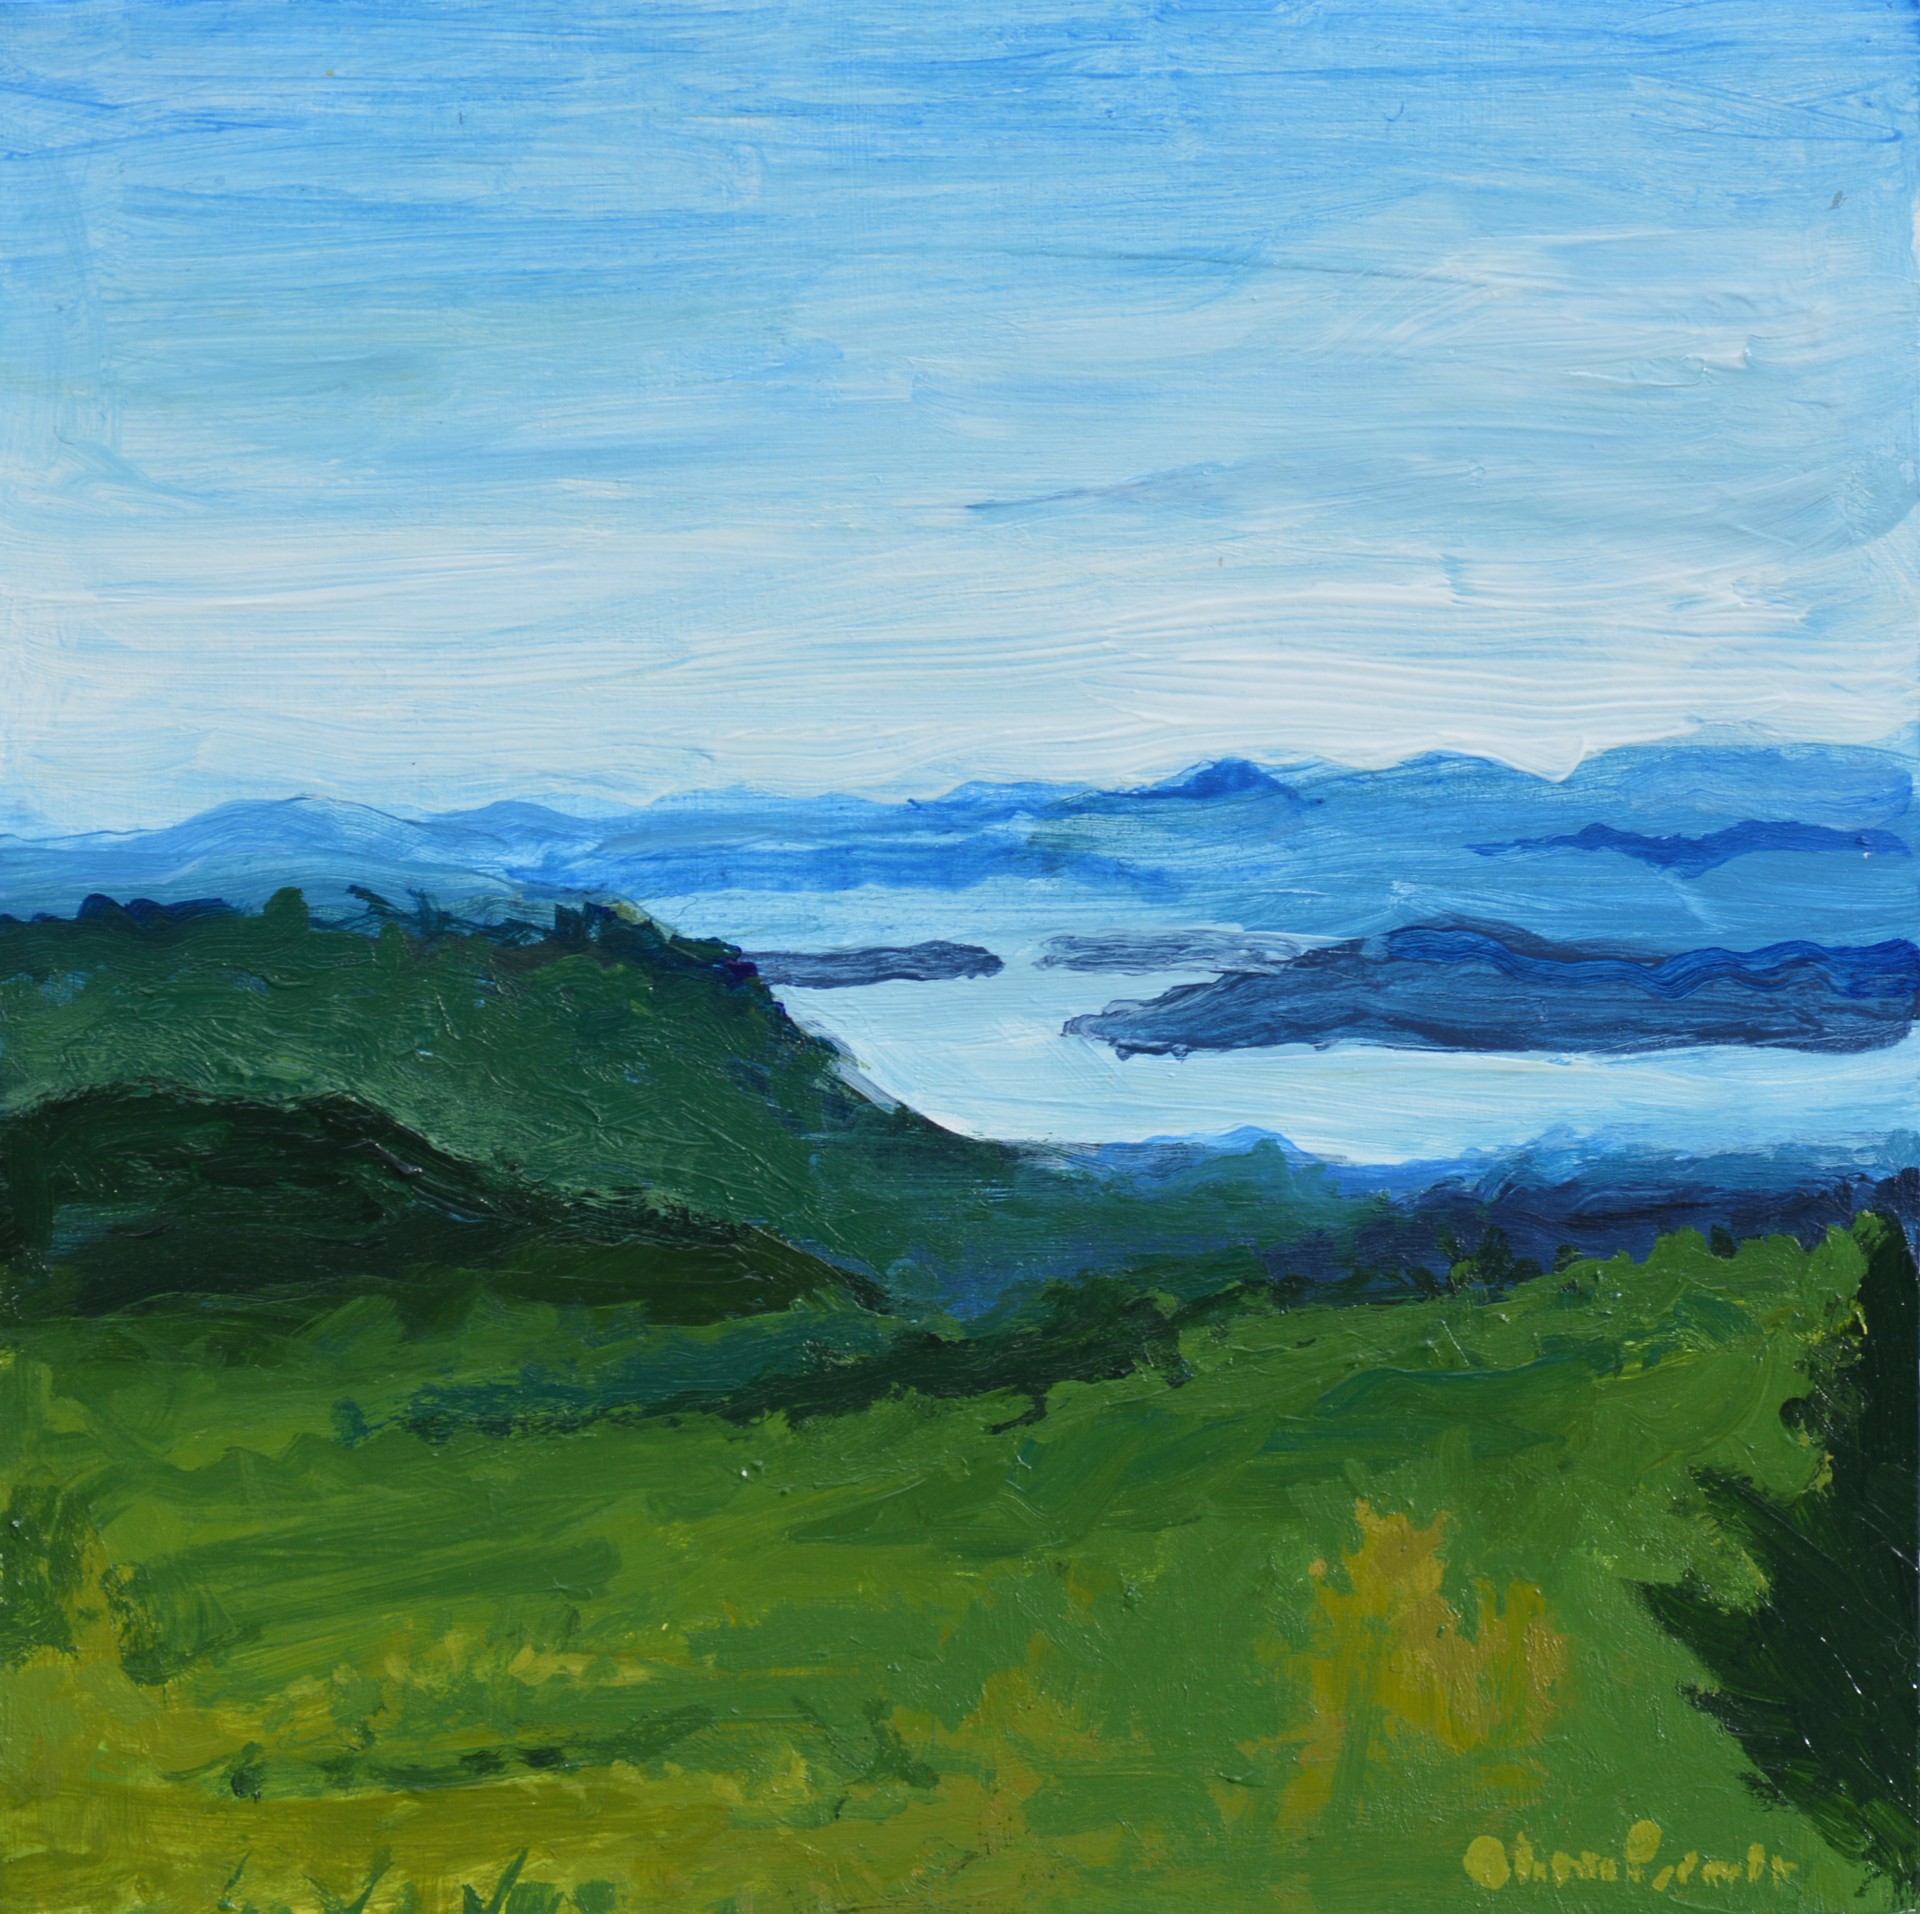 Lake Toxaway in the Distance by Olivia Perreault